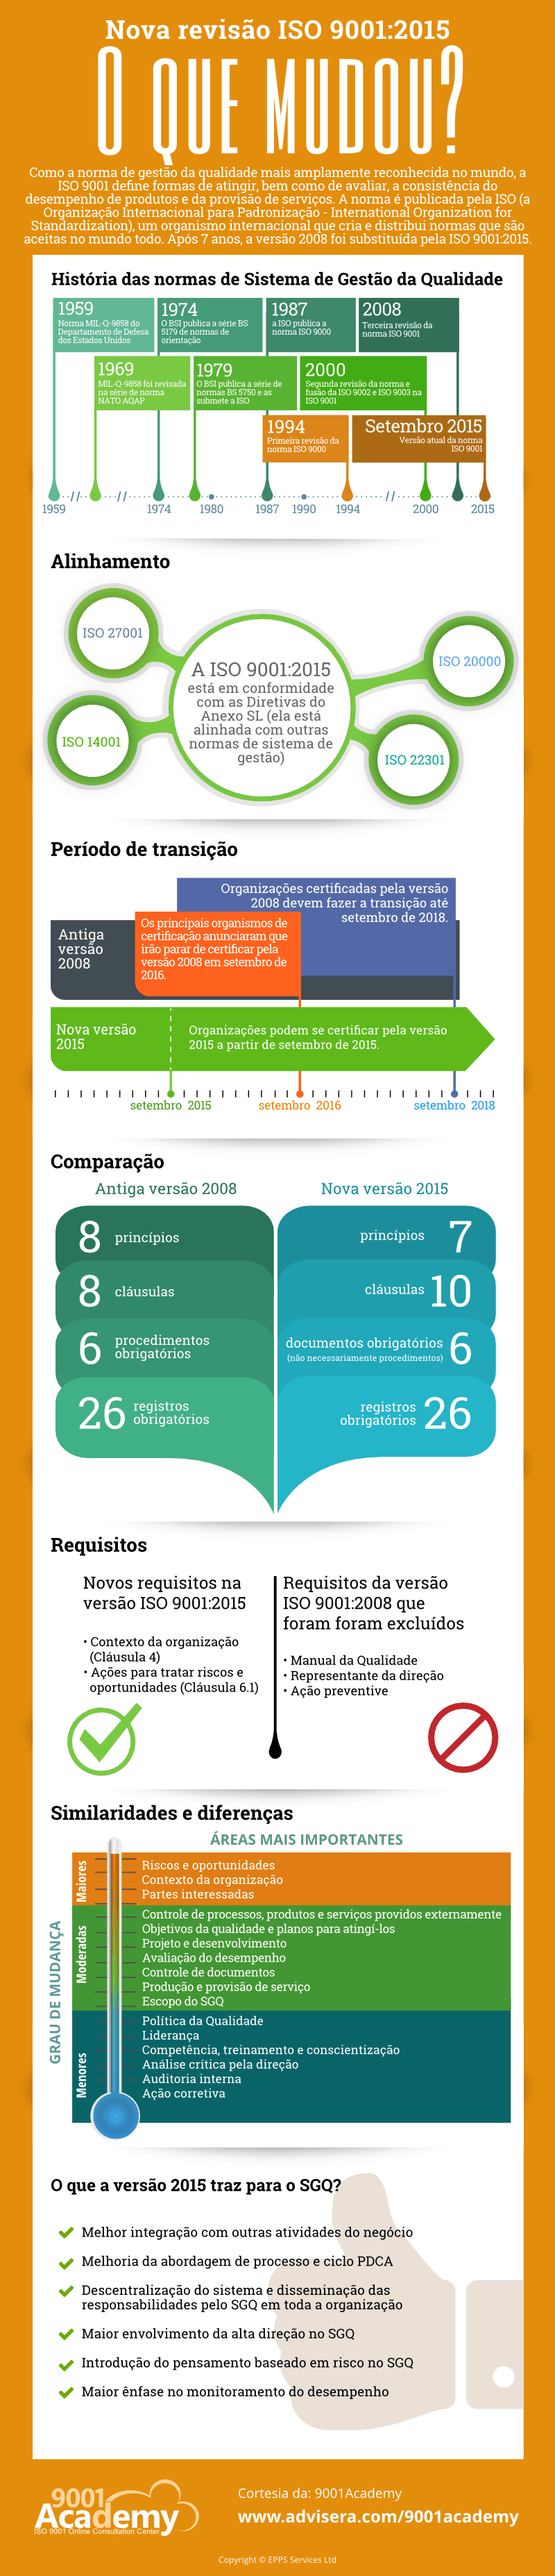 iso_9001-2015_vs_iso_9001-2008_infographic-pt_br